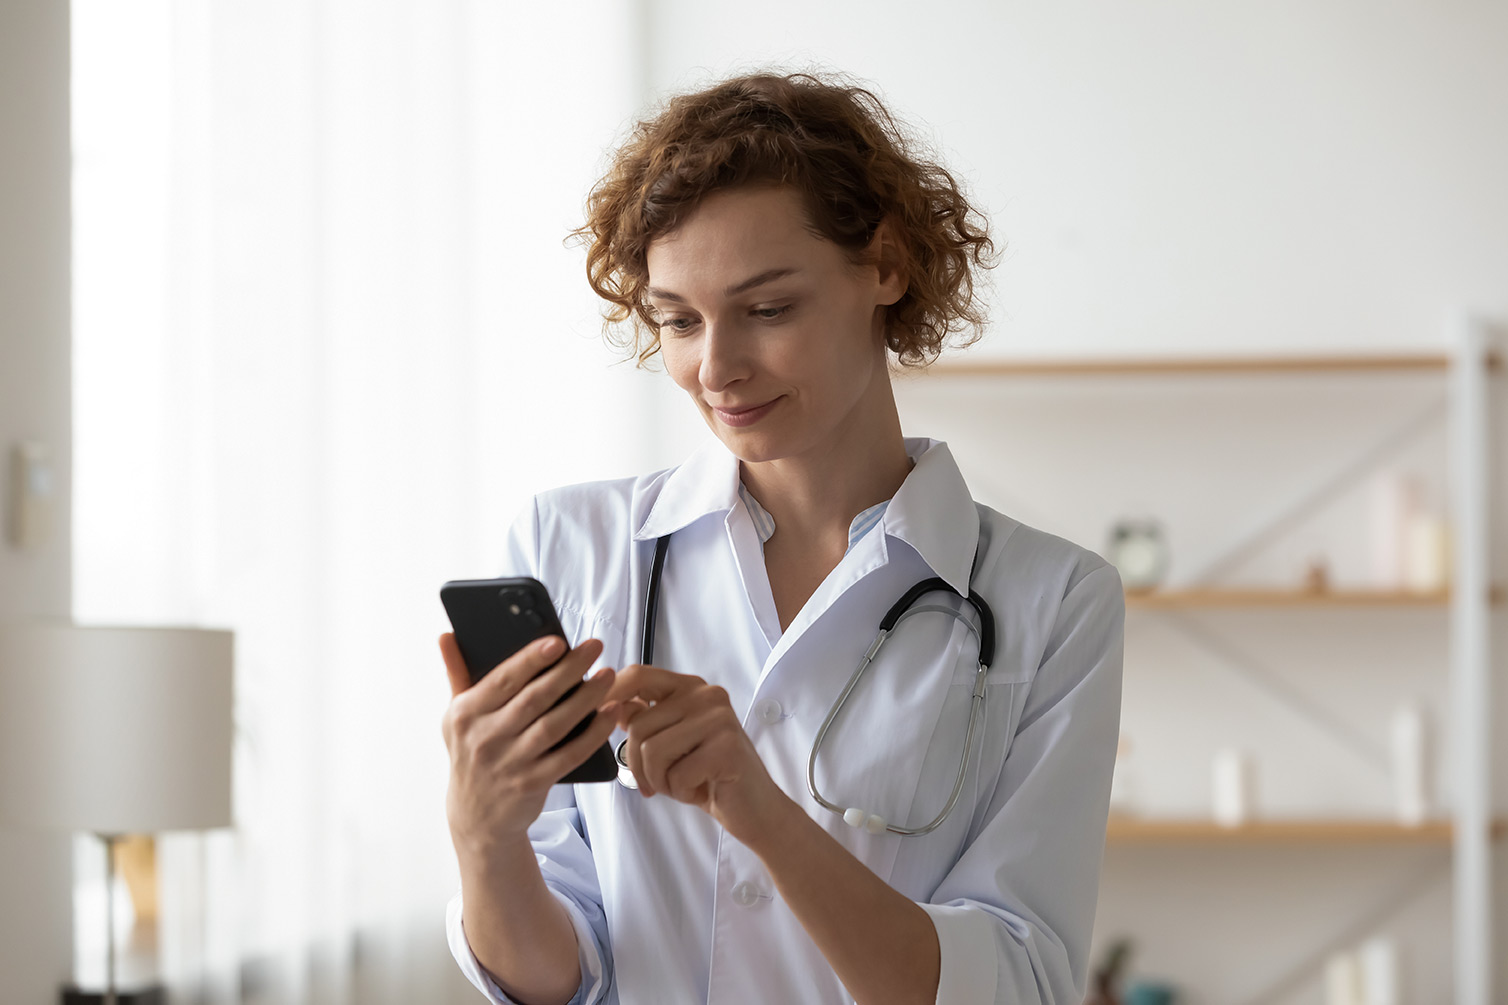 Image of a doctor viewing a mobile device